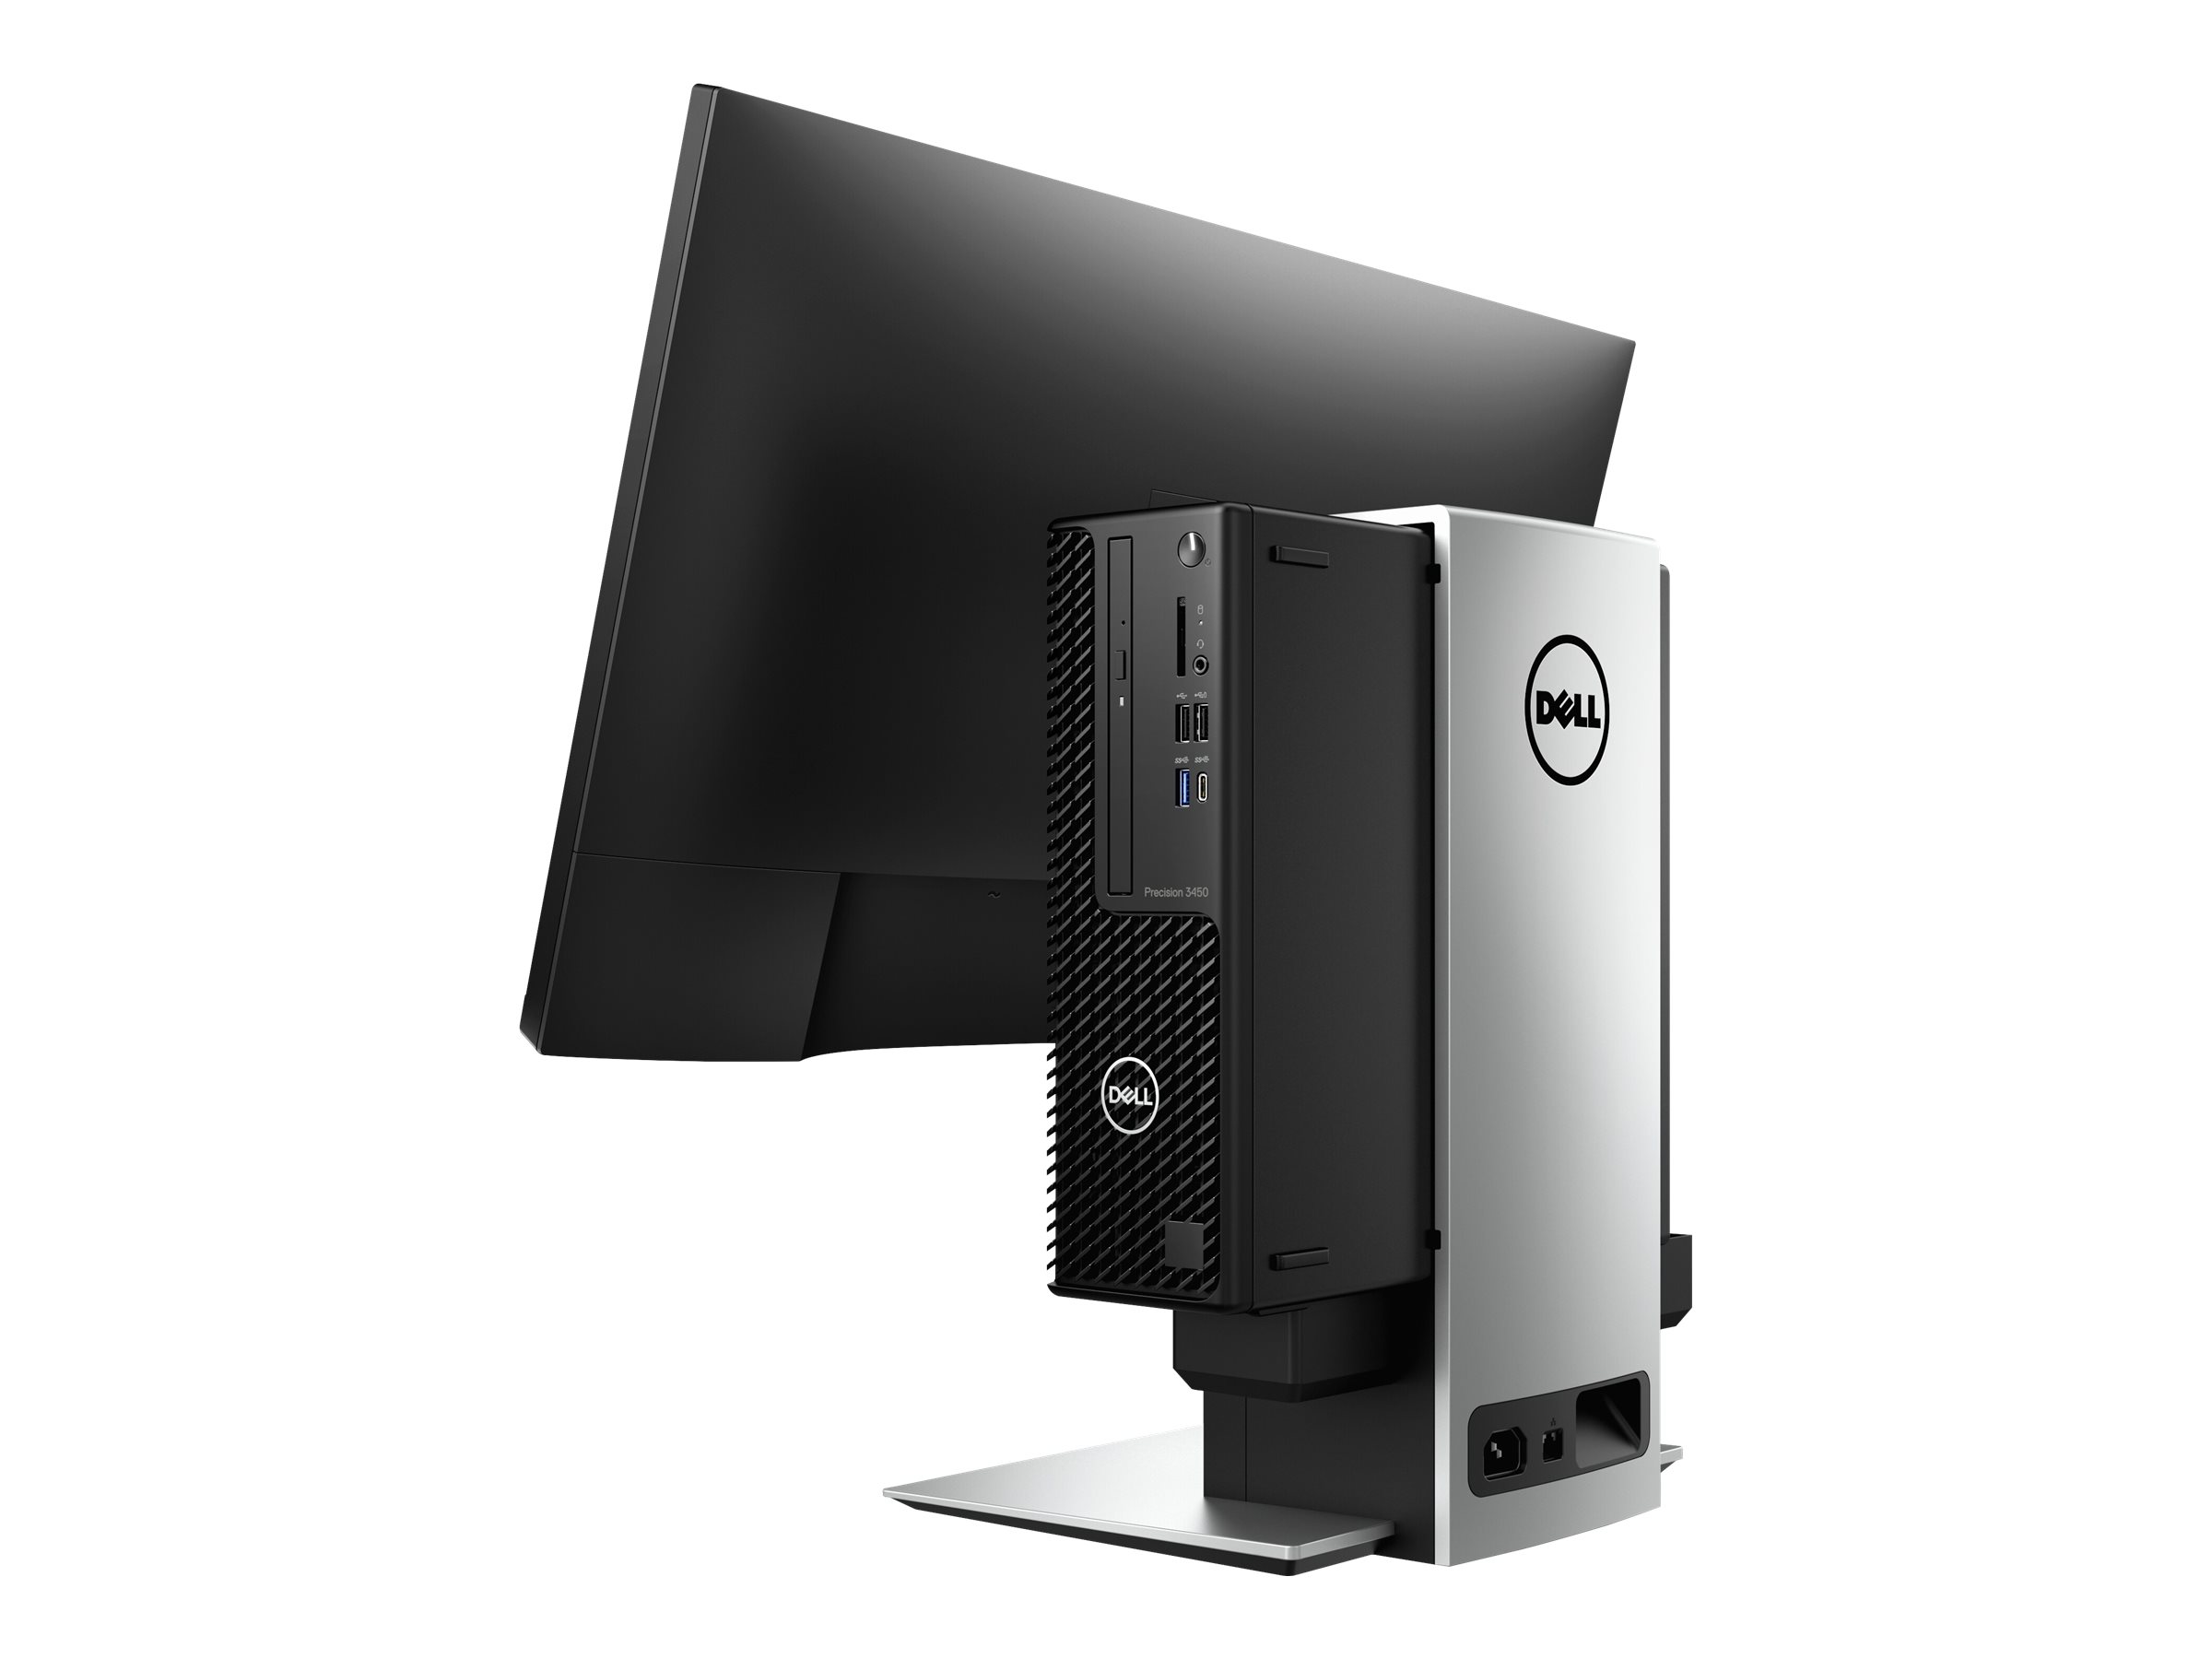 Dell 3450 Small Form Factor - SFF - 1 x Core i7 10700 / 2.9 GHz - vPro - RAM 16 GB - SSD 512 GB